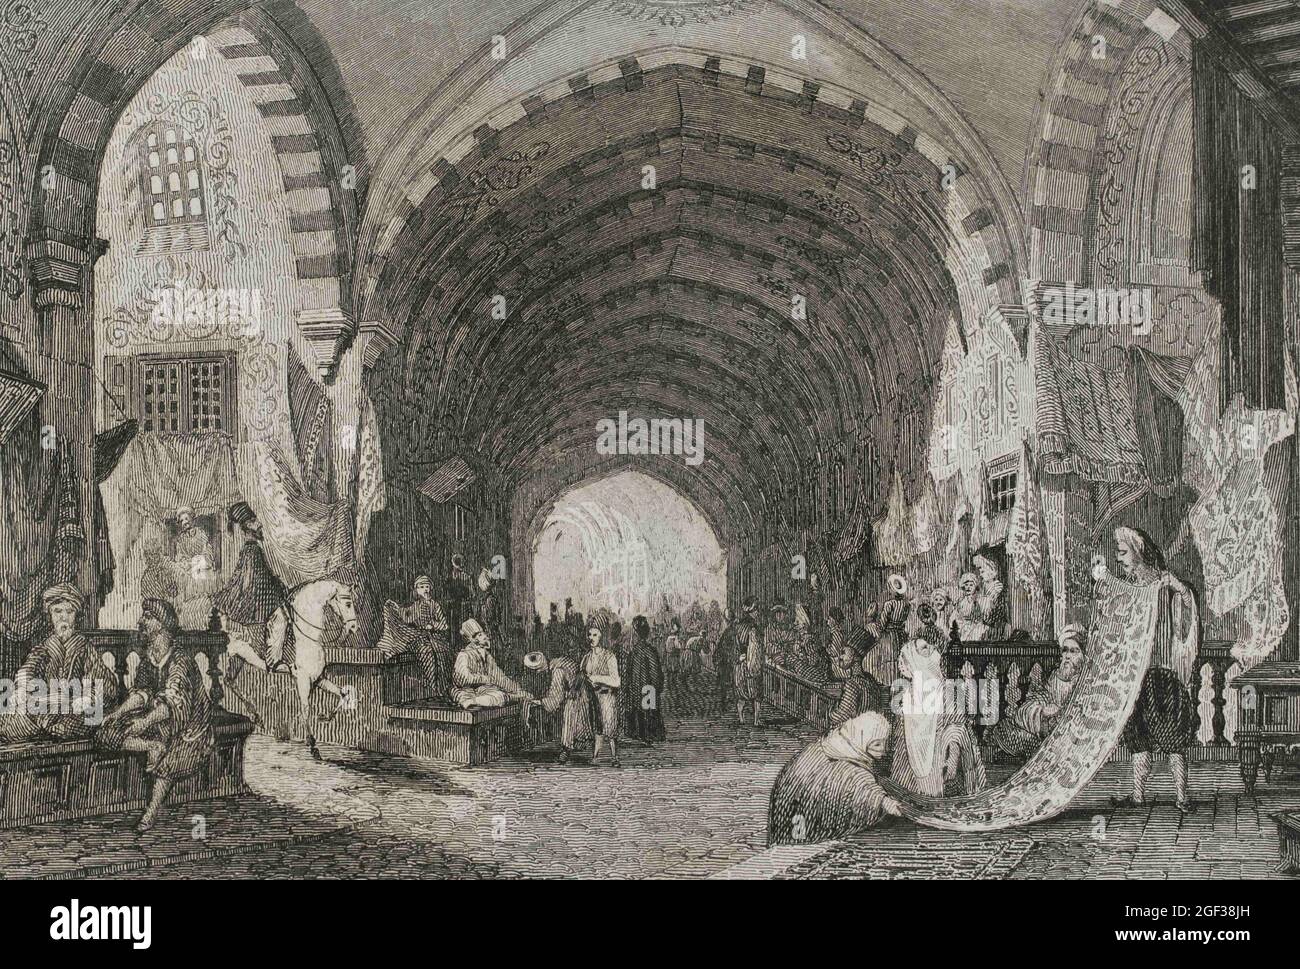 Ottoman Empire. Turkey. Constantinople (today Istanbul). The Bazaar. Engraving by Lemaitre. Historia de Turquia by Joseph Marie Jouannin (1783-1844) a Stock Photo